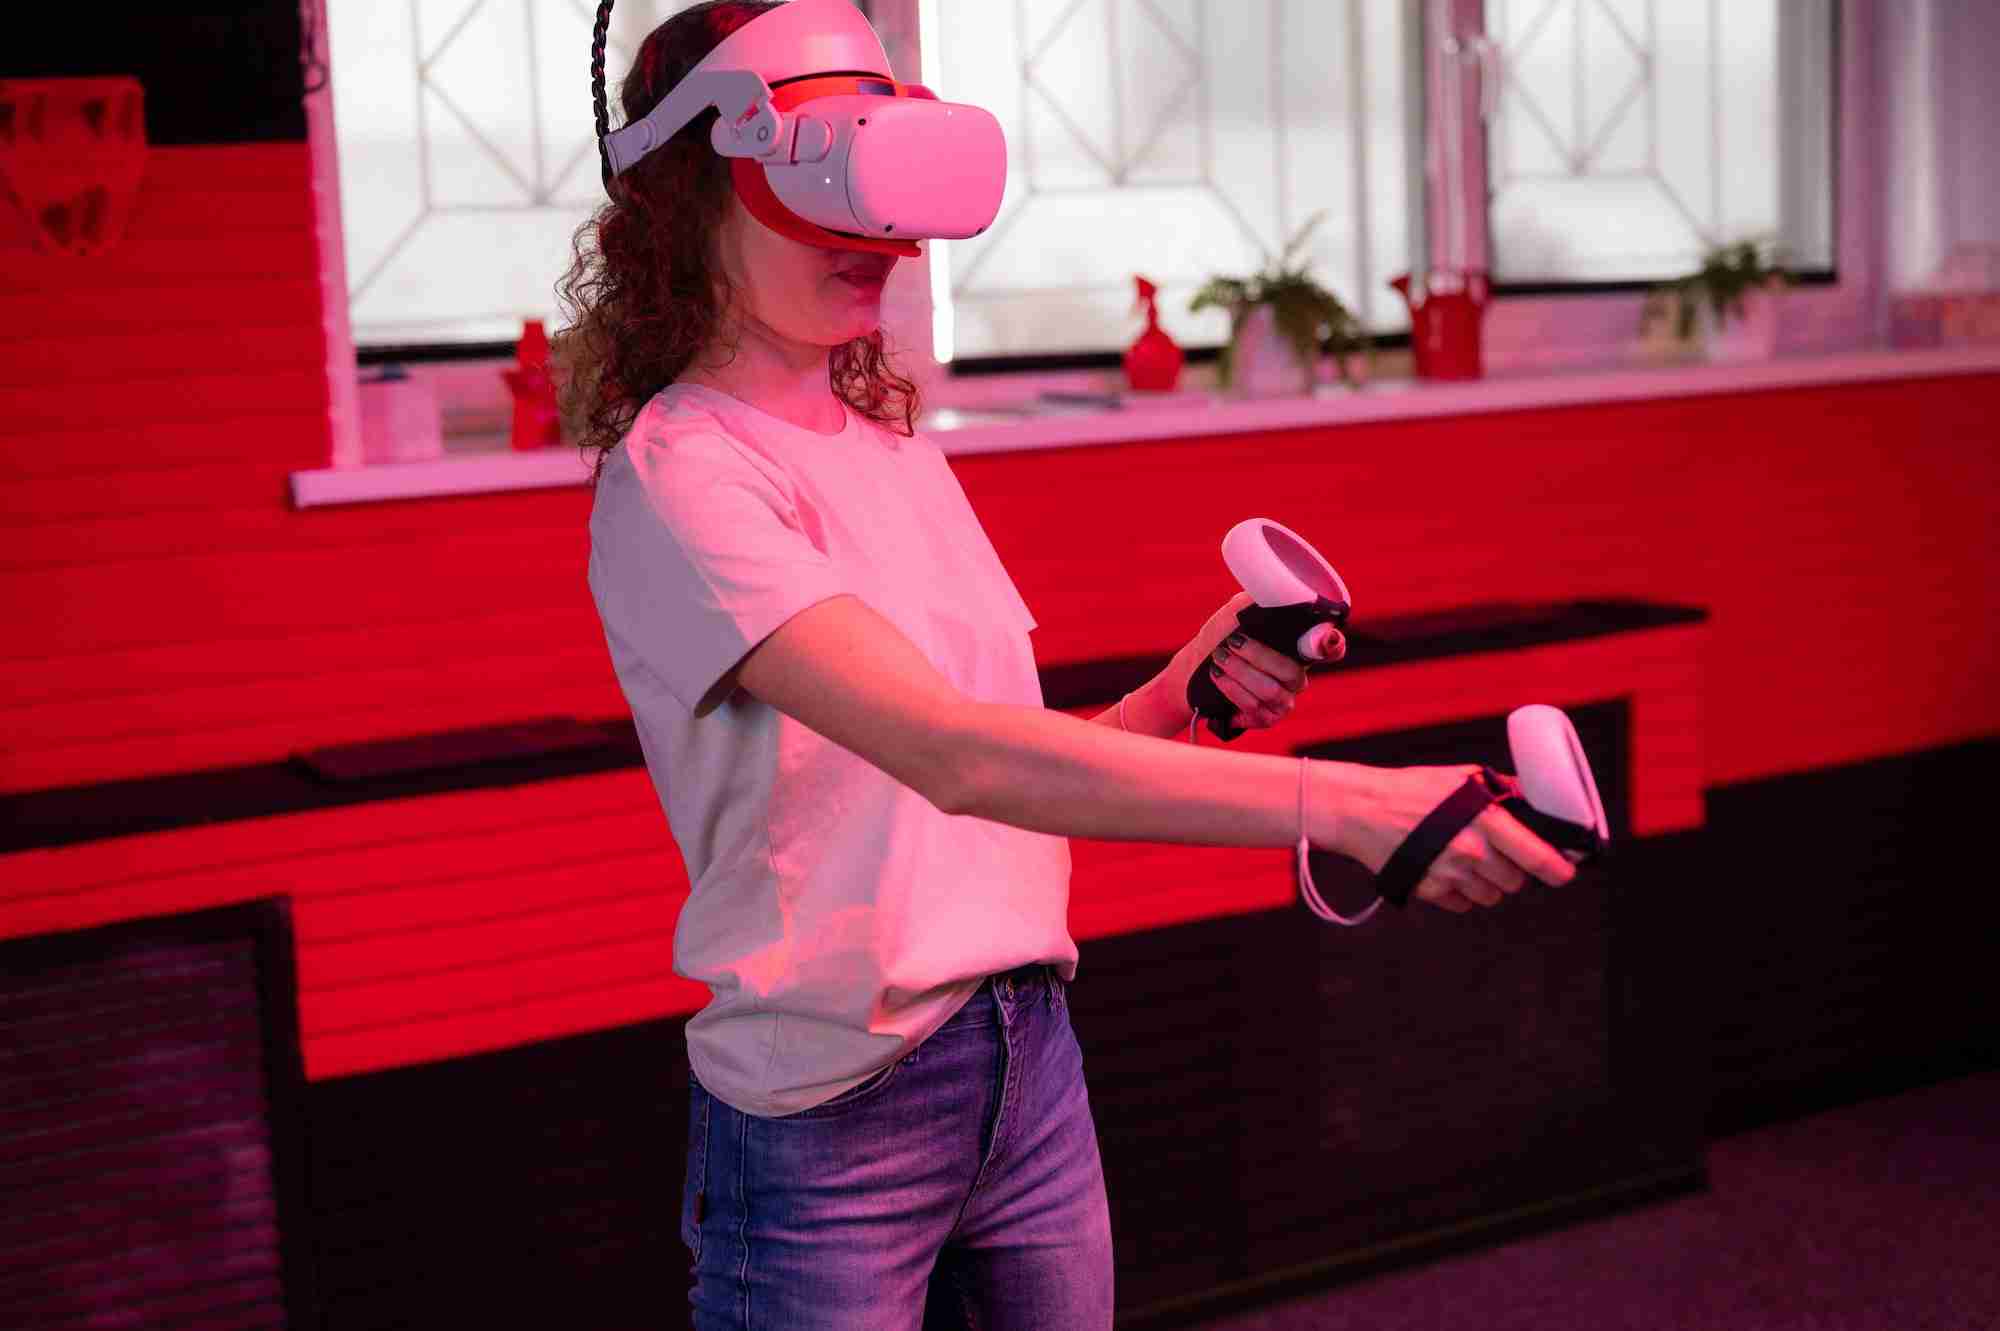 vr game and virtual reality. adult woman gamer in goggles playing on shooting simulation video game